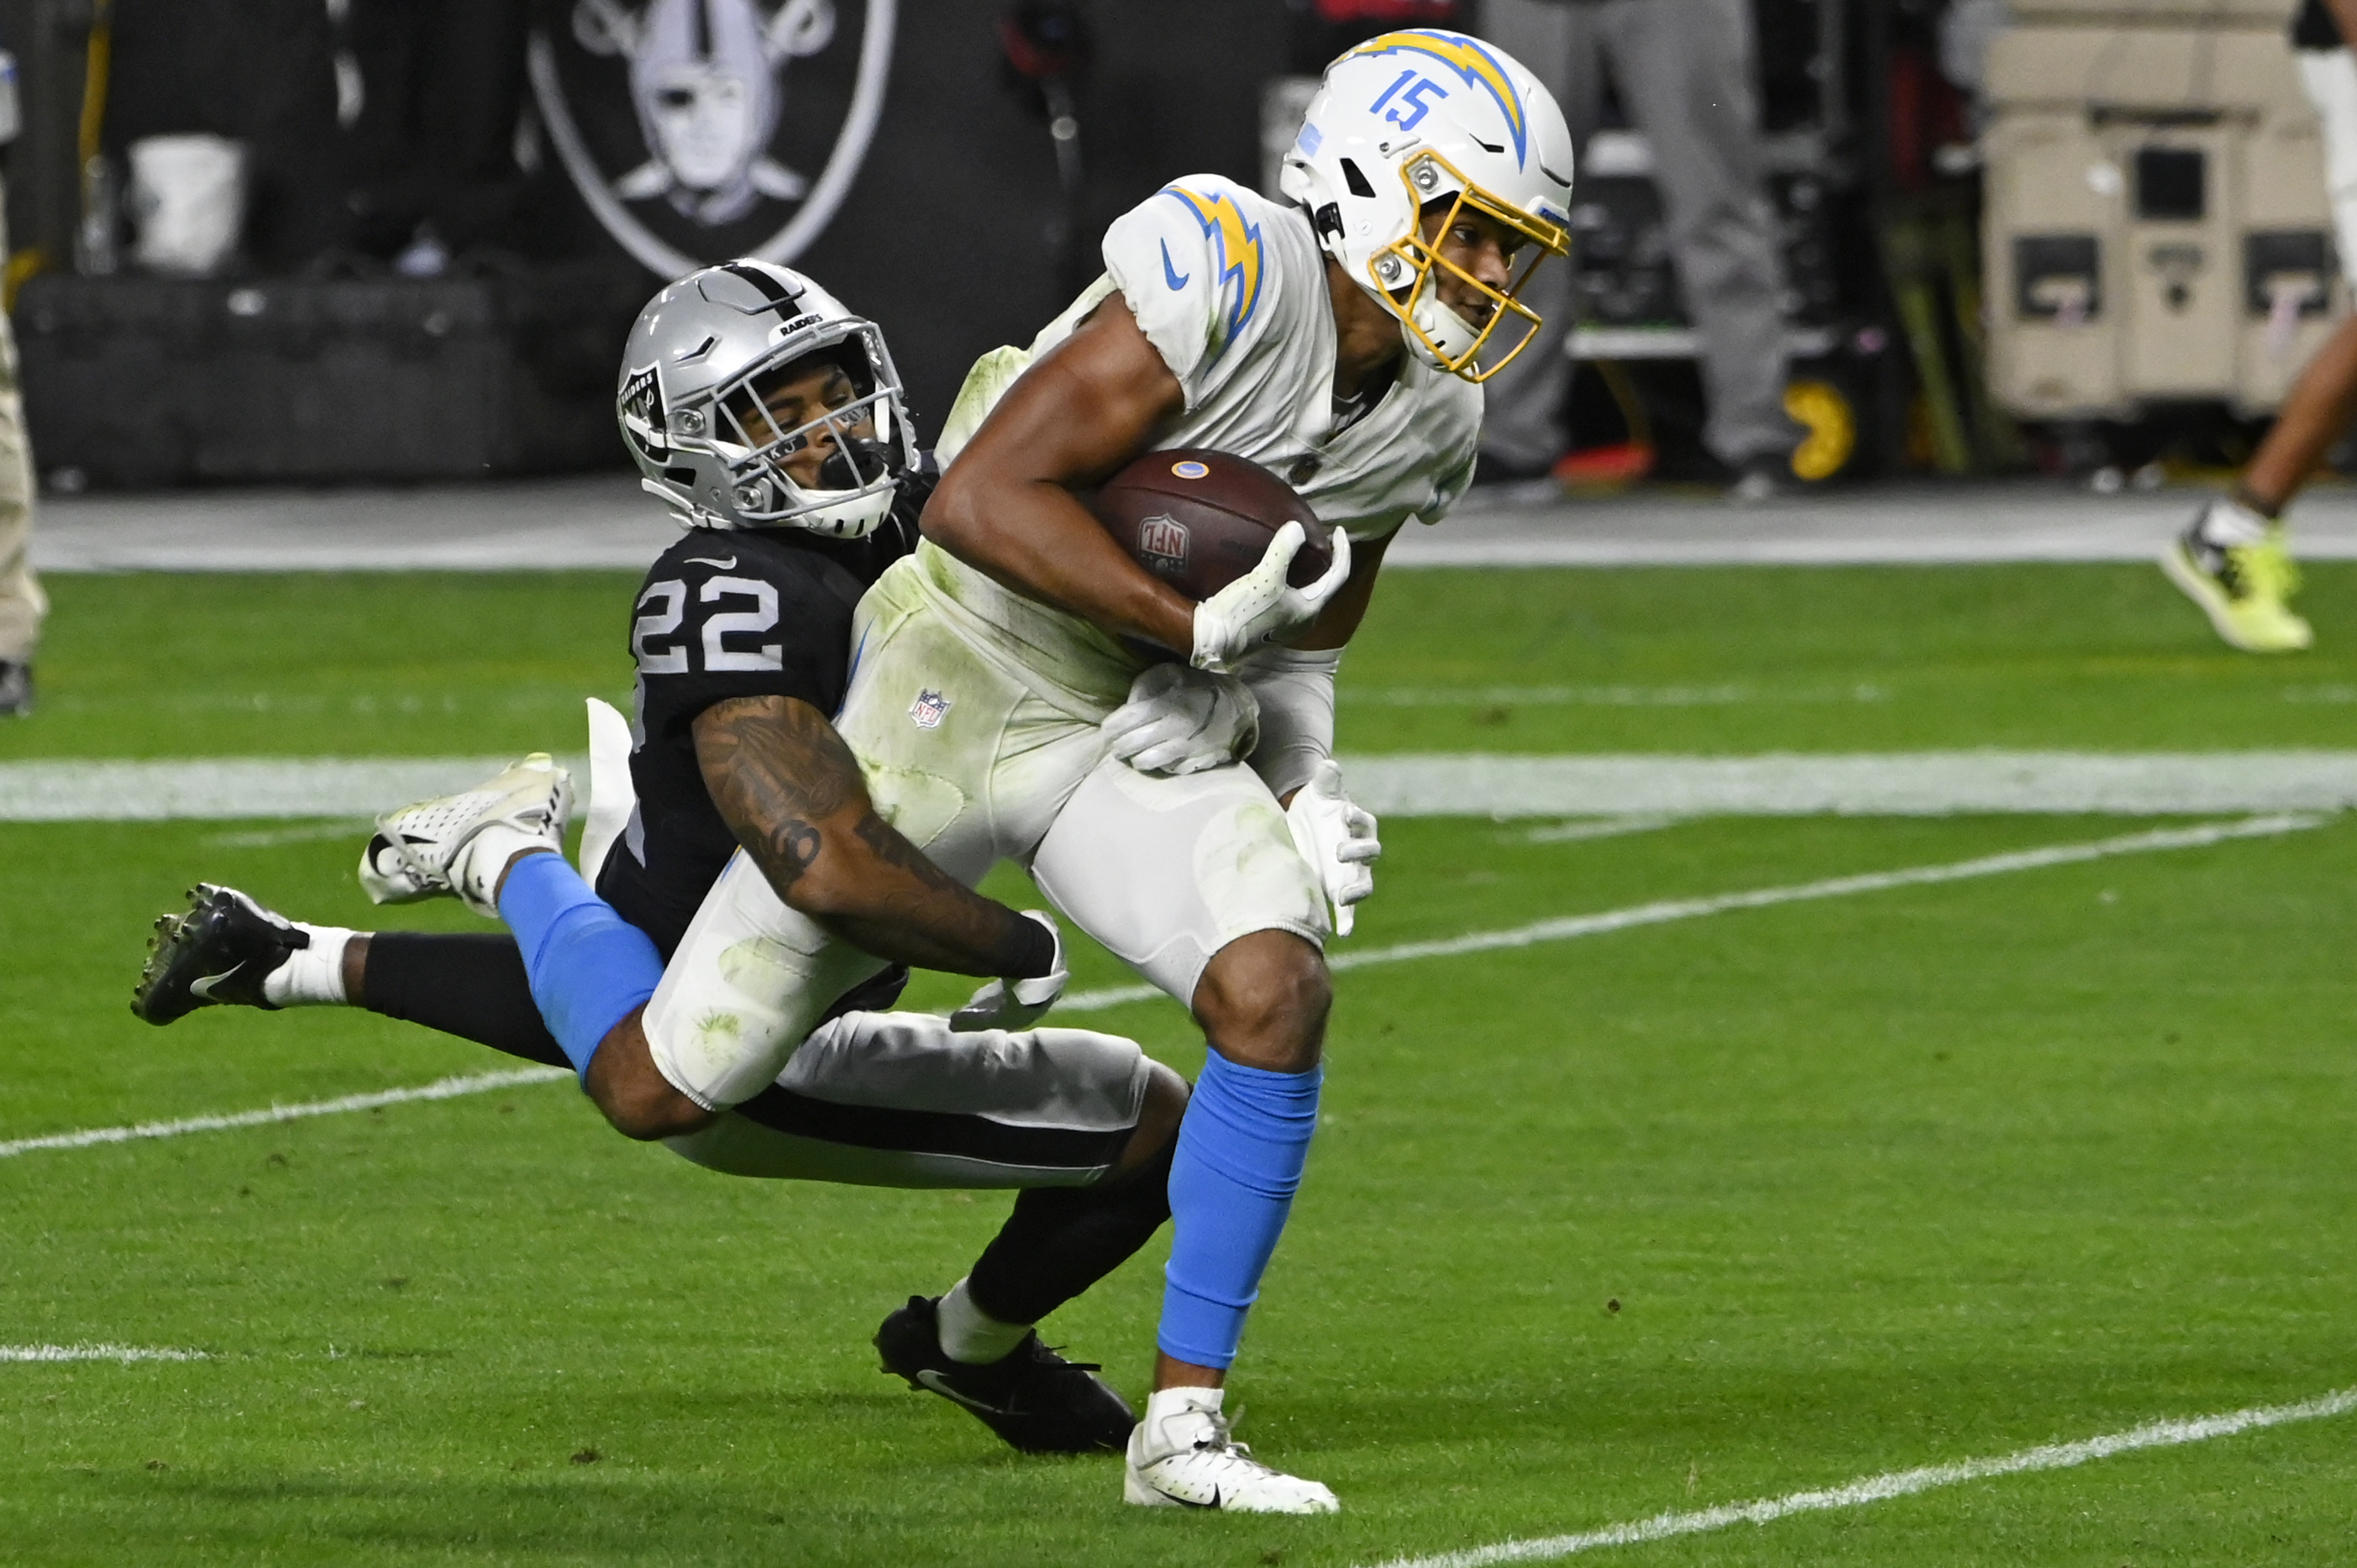 Raiders lose QB Carr, fall in overtime to Chargers, Herbert